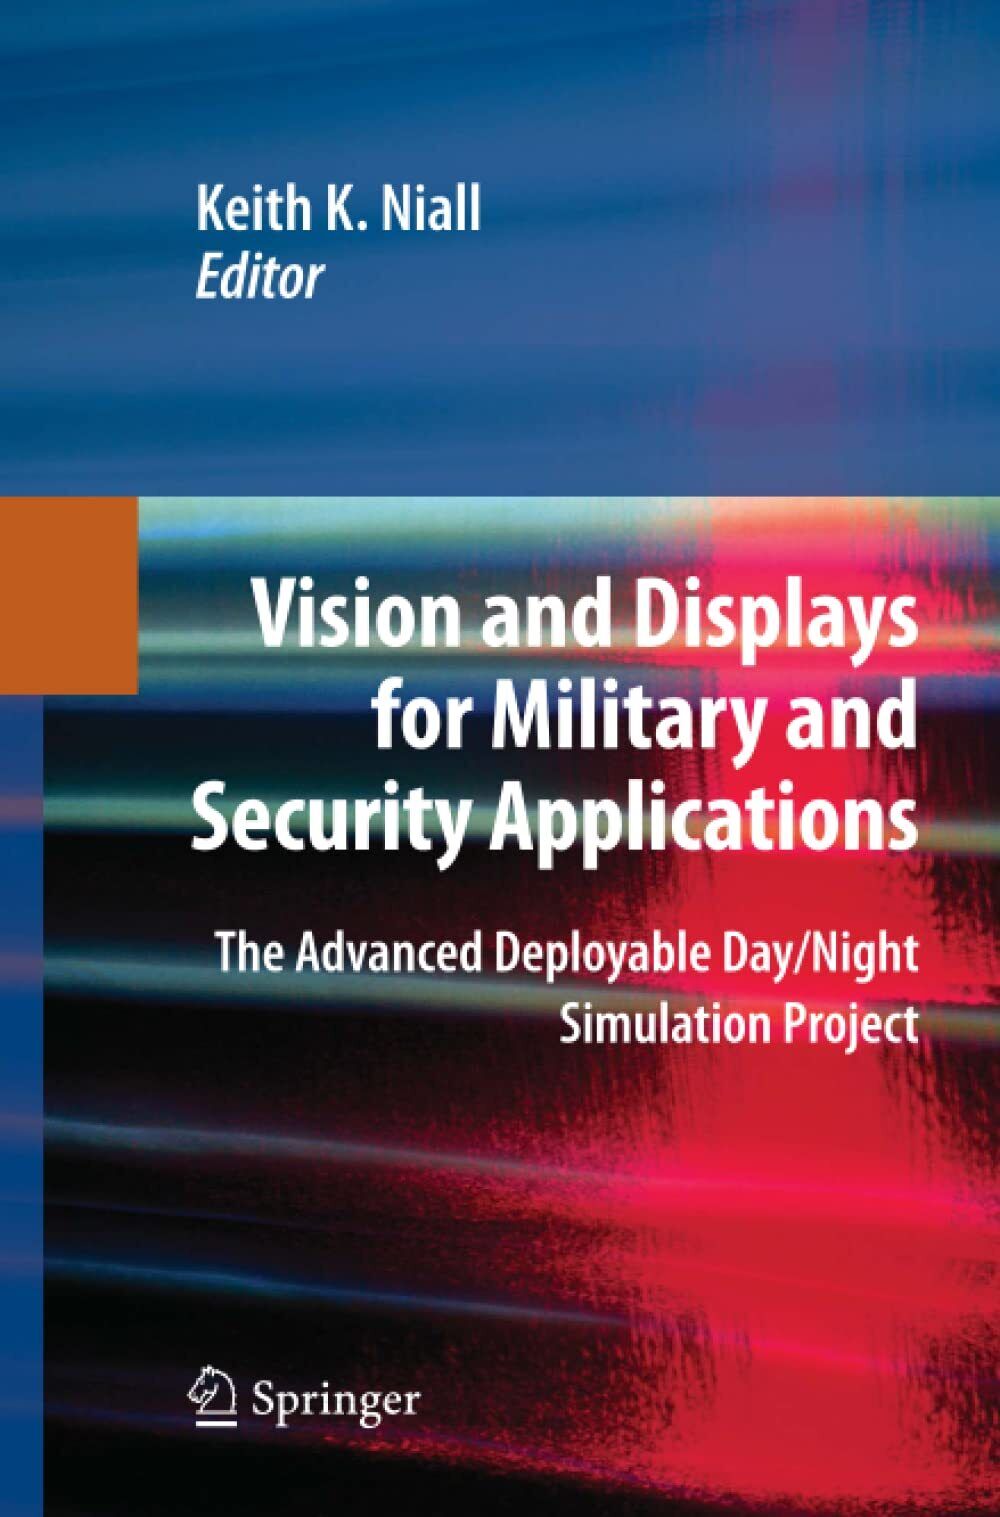 Vision and Displays for Military and Security Applications - Springer, 2014